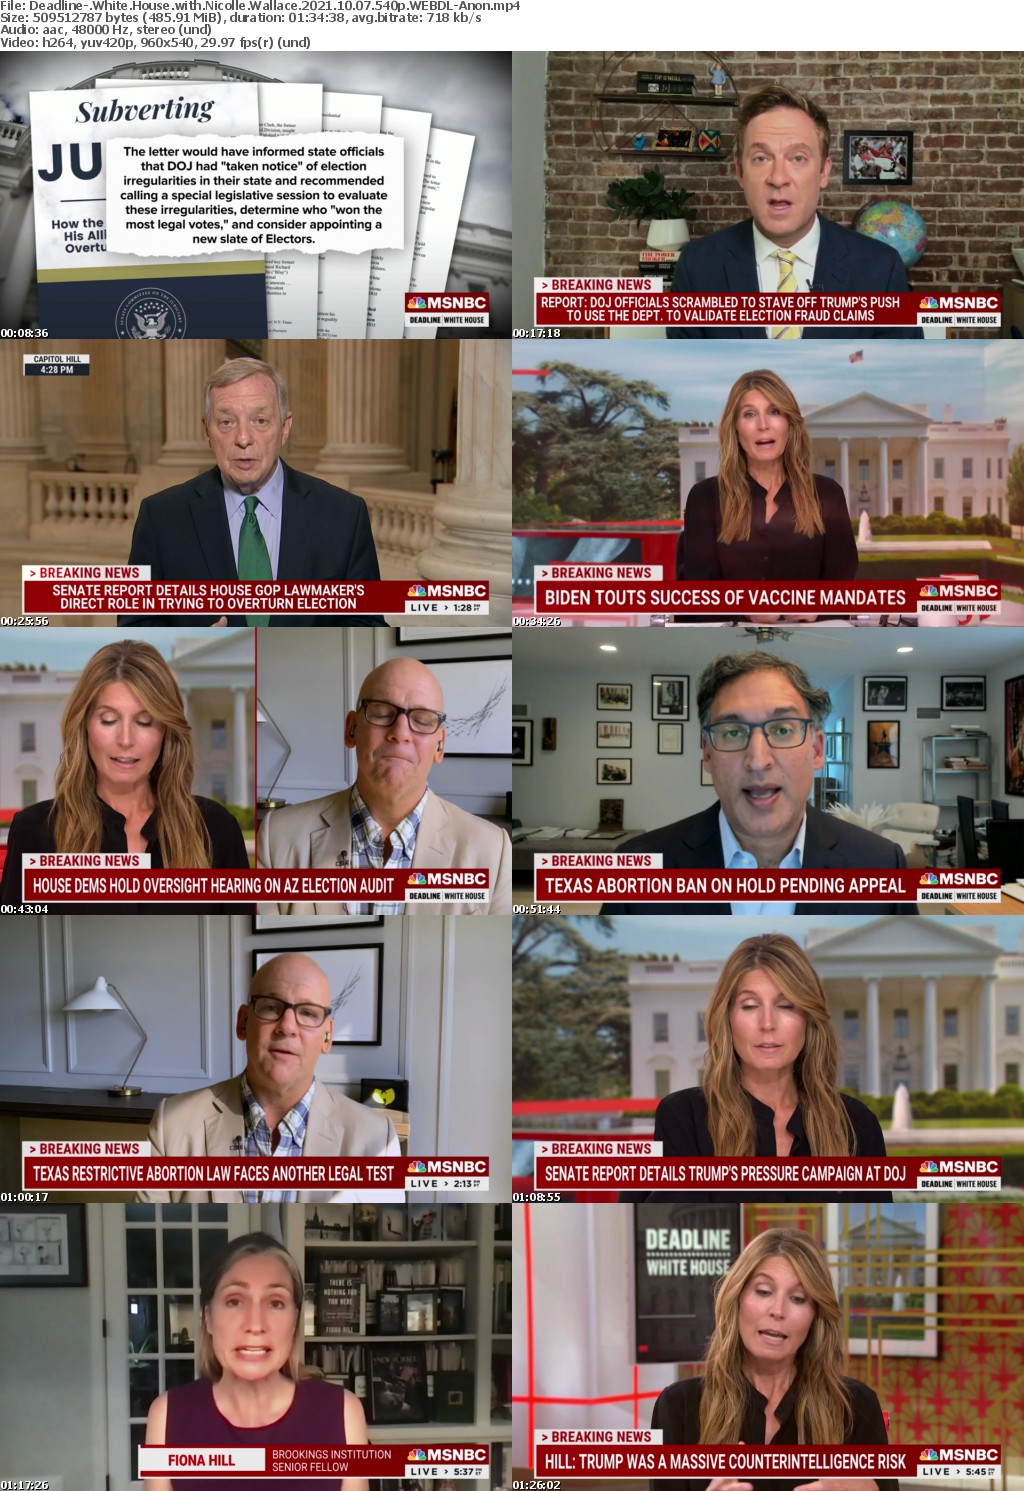 Deadline- White House with Nicolle Wallace 2021 10 07 540p WEBDL-Anon